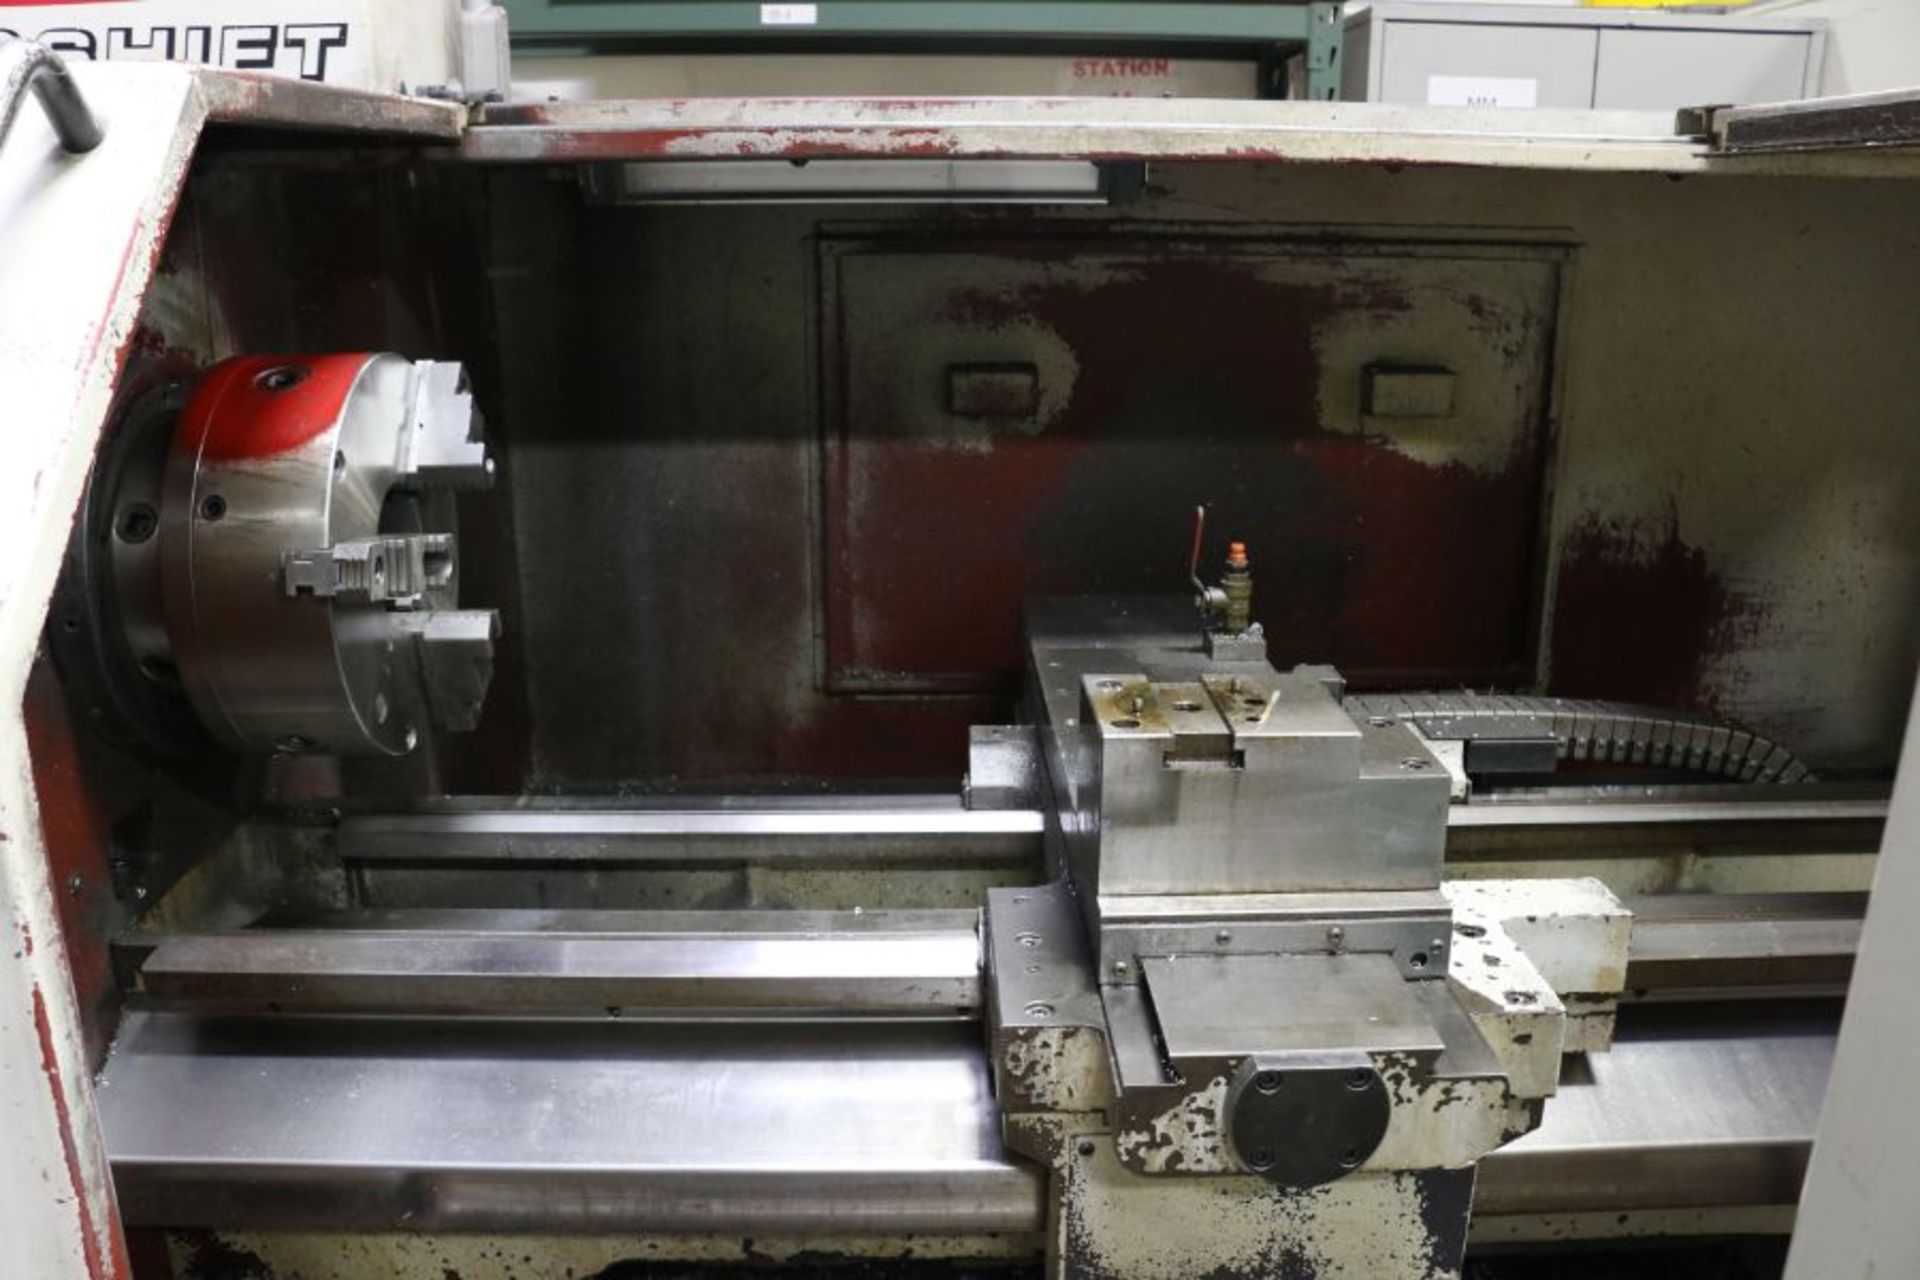 Fryer Tool Master 2160 21" x 60" CNC Lathe, Toolmaster T2000 Control, 12" 3 Jaw Chuck, 3" Bore - Image 5 of 10